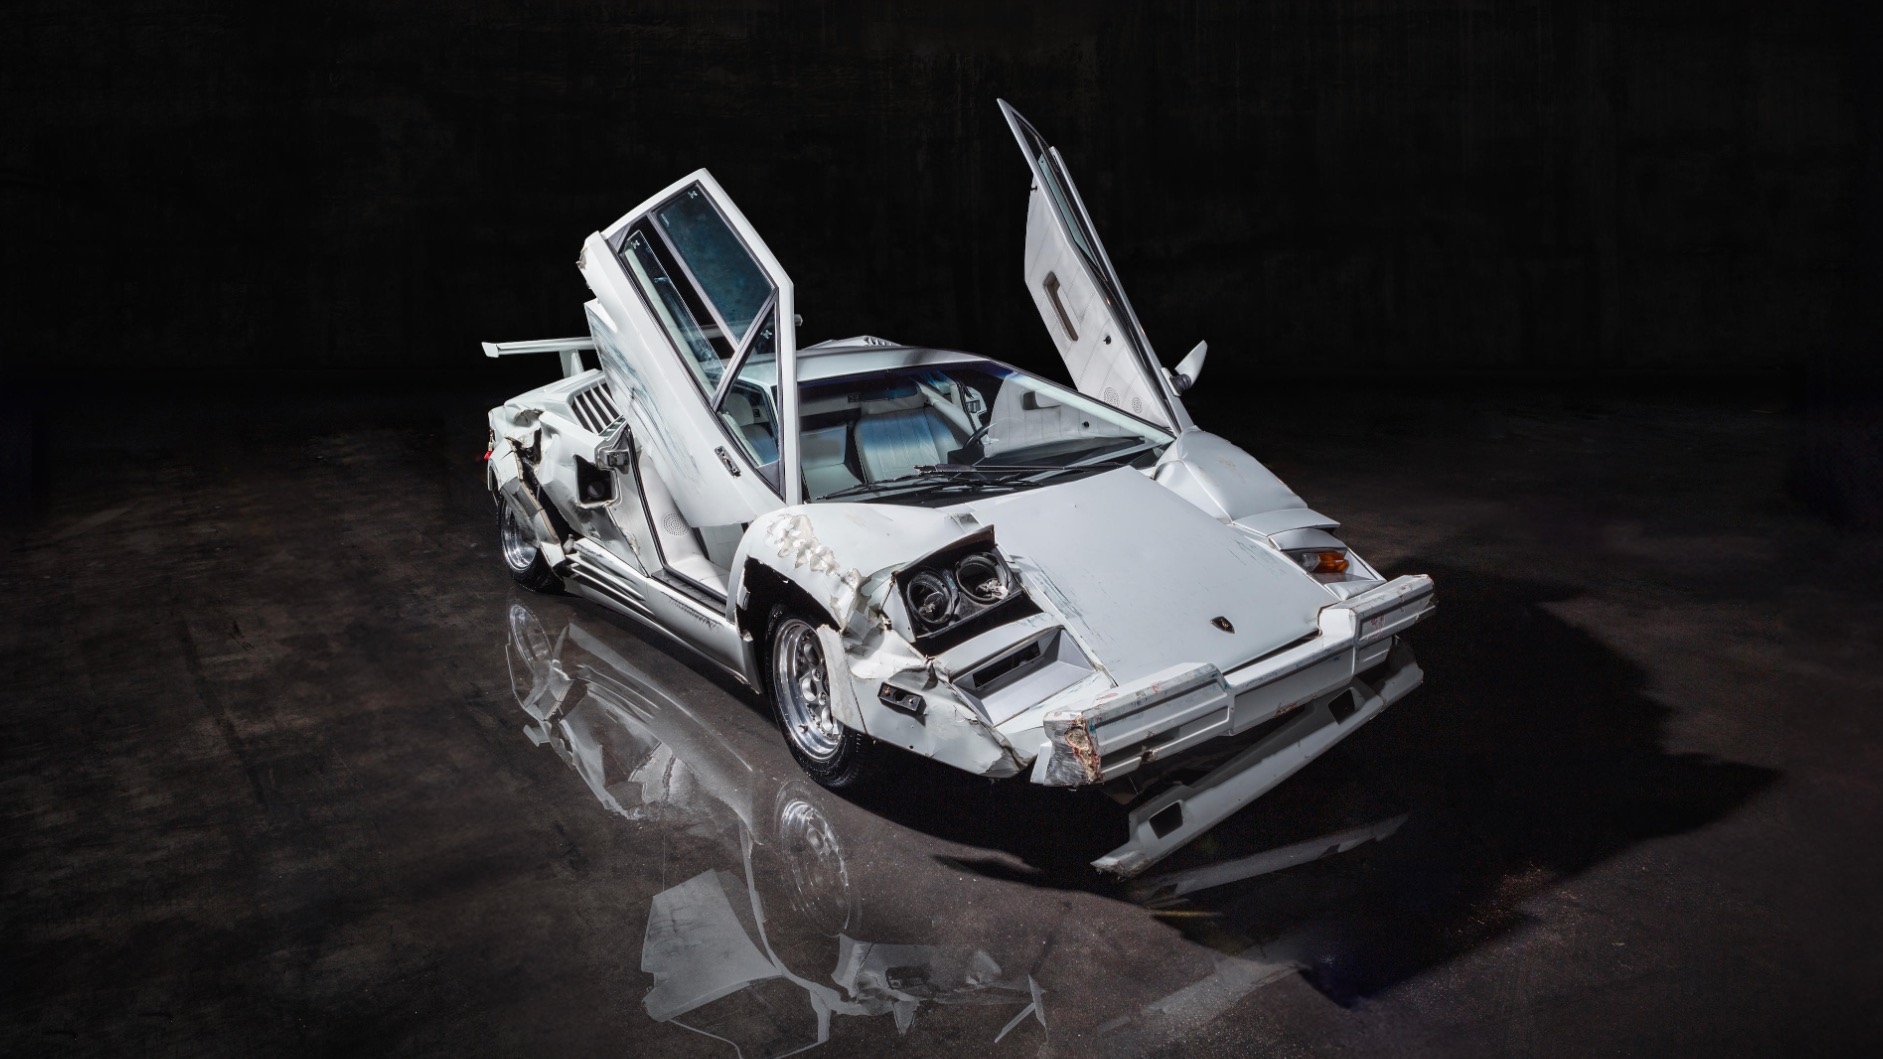 “Wolf of Wall Street” Lamborghini Countach heads to auction Auto Recent